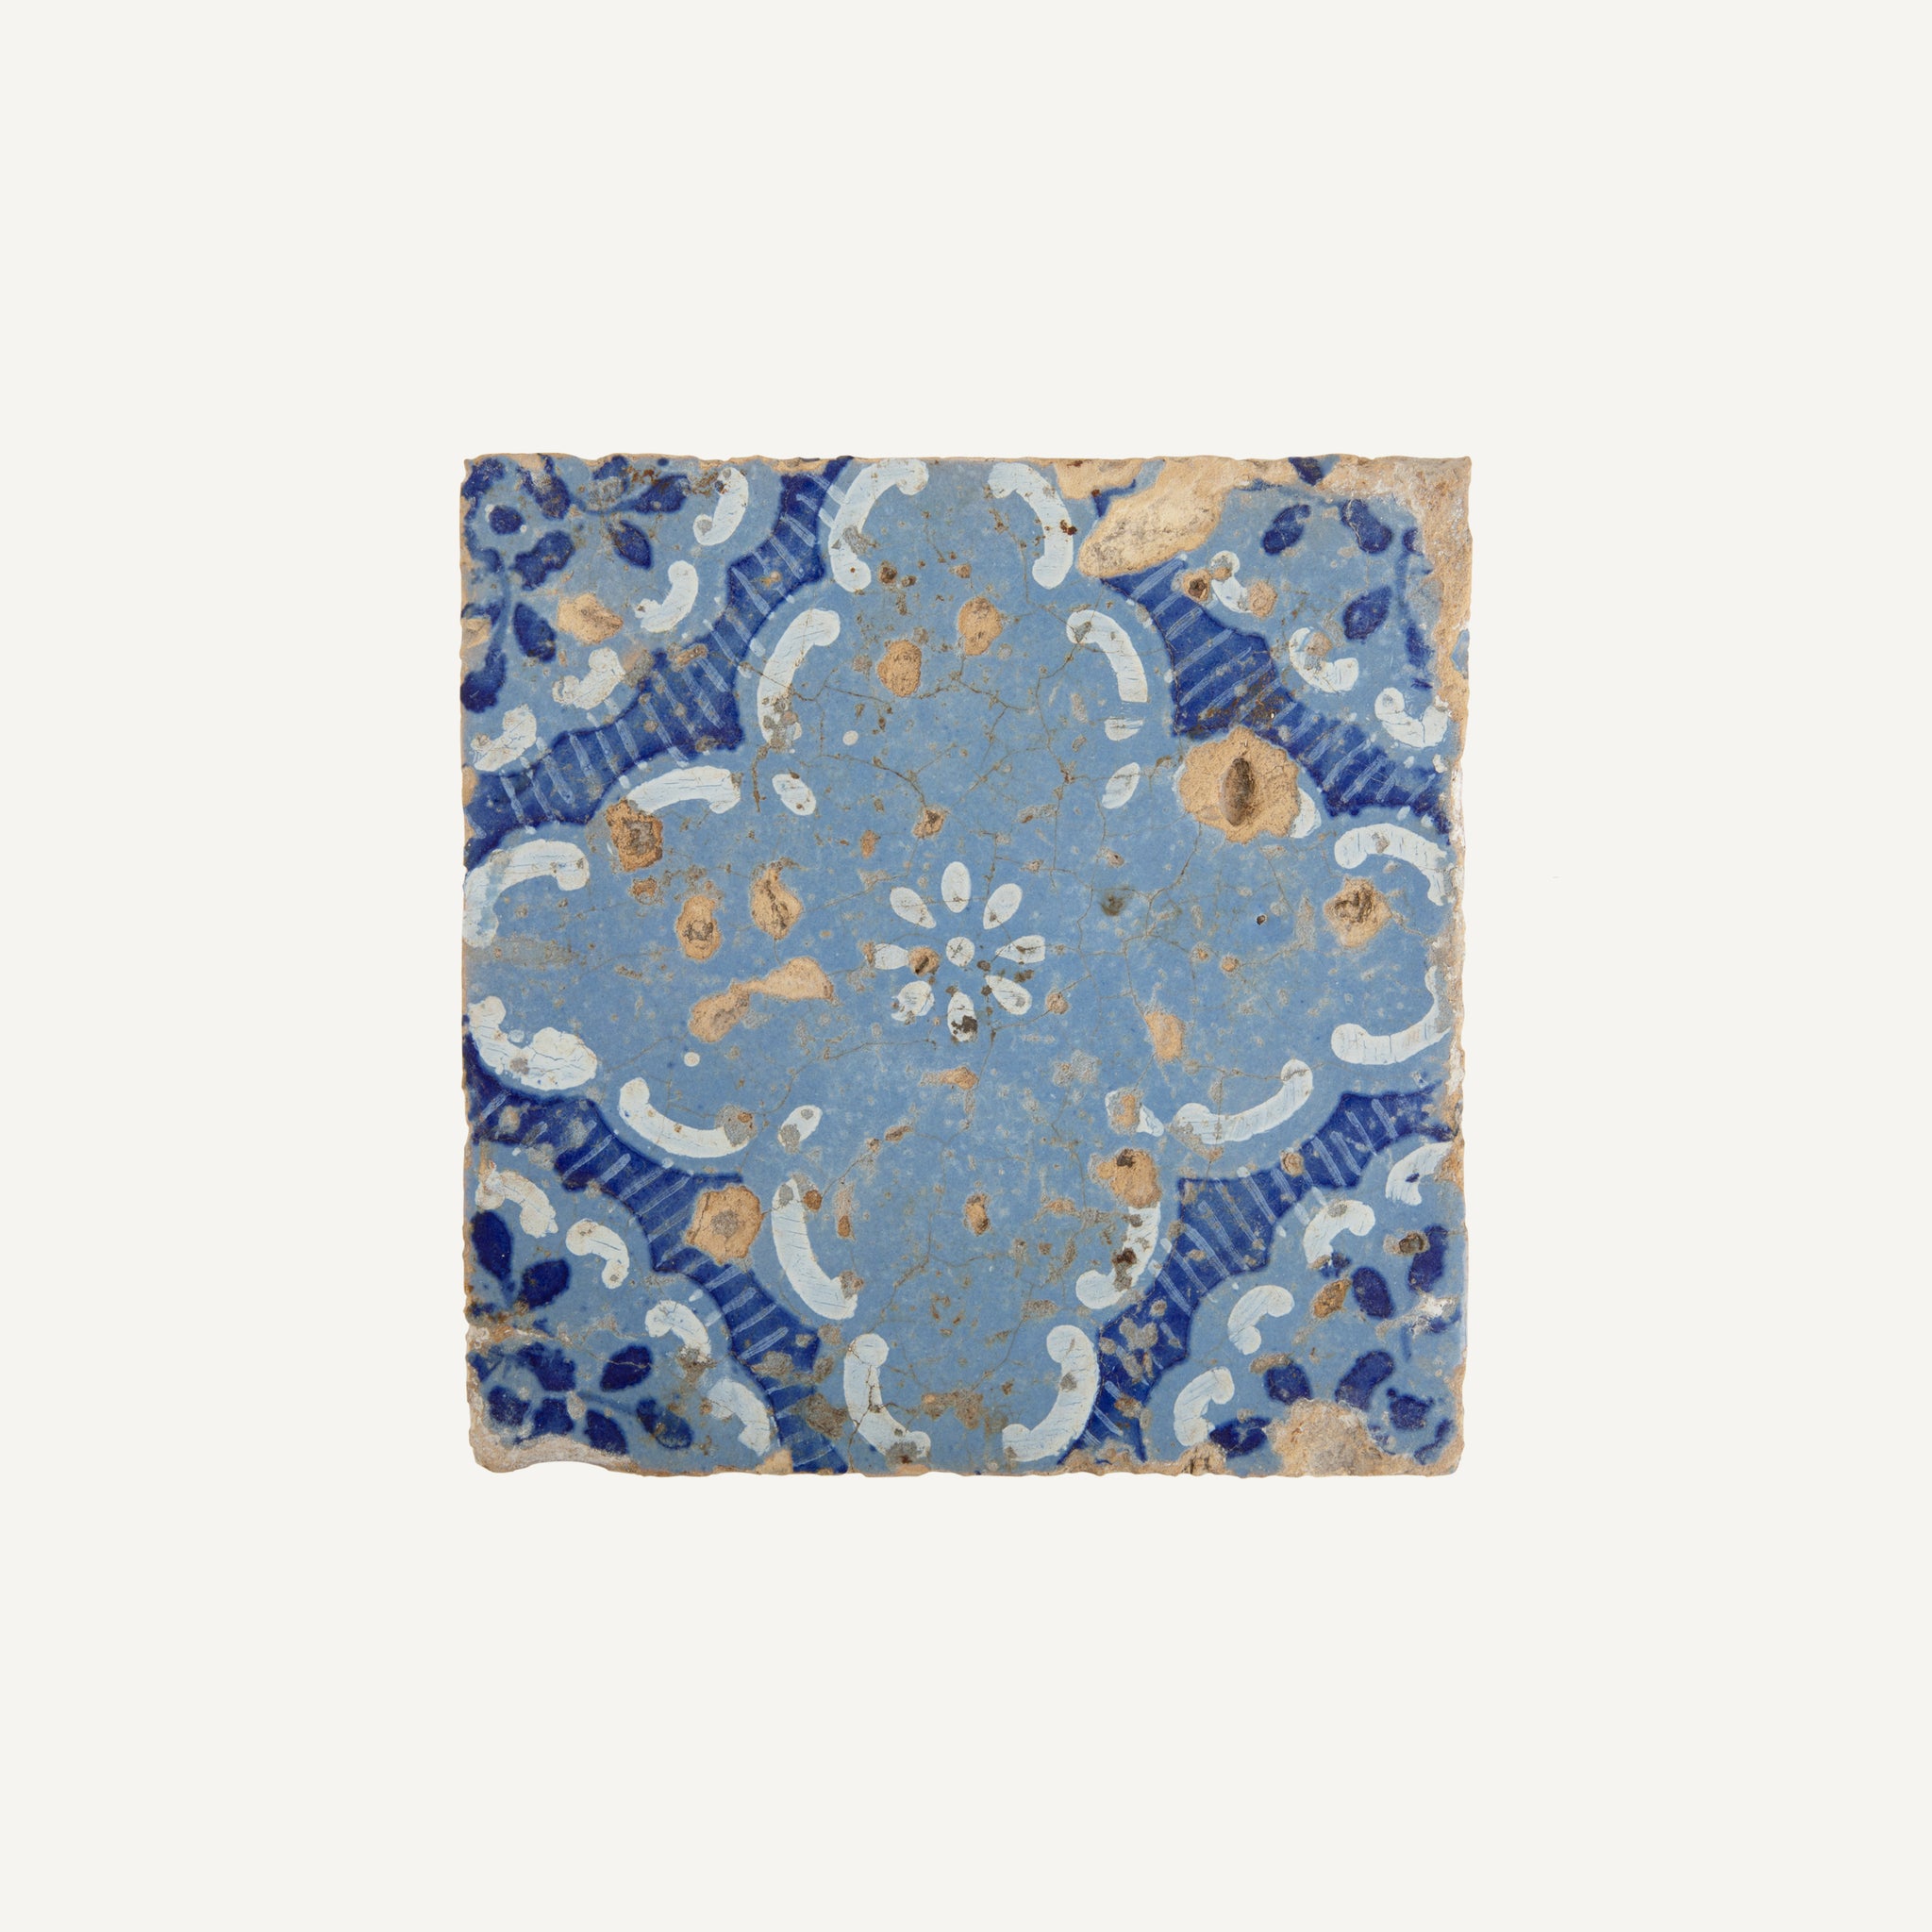 ANTIQUE FRENCH TILES